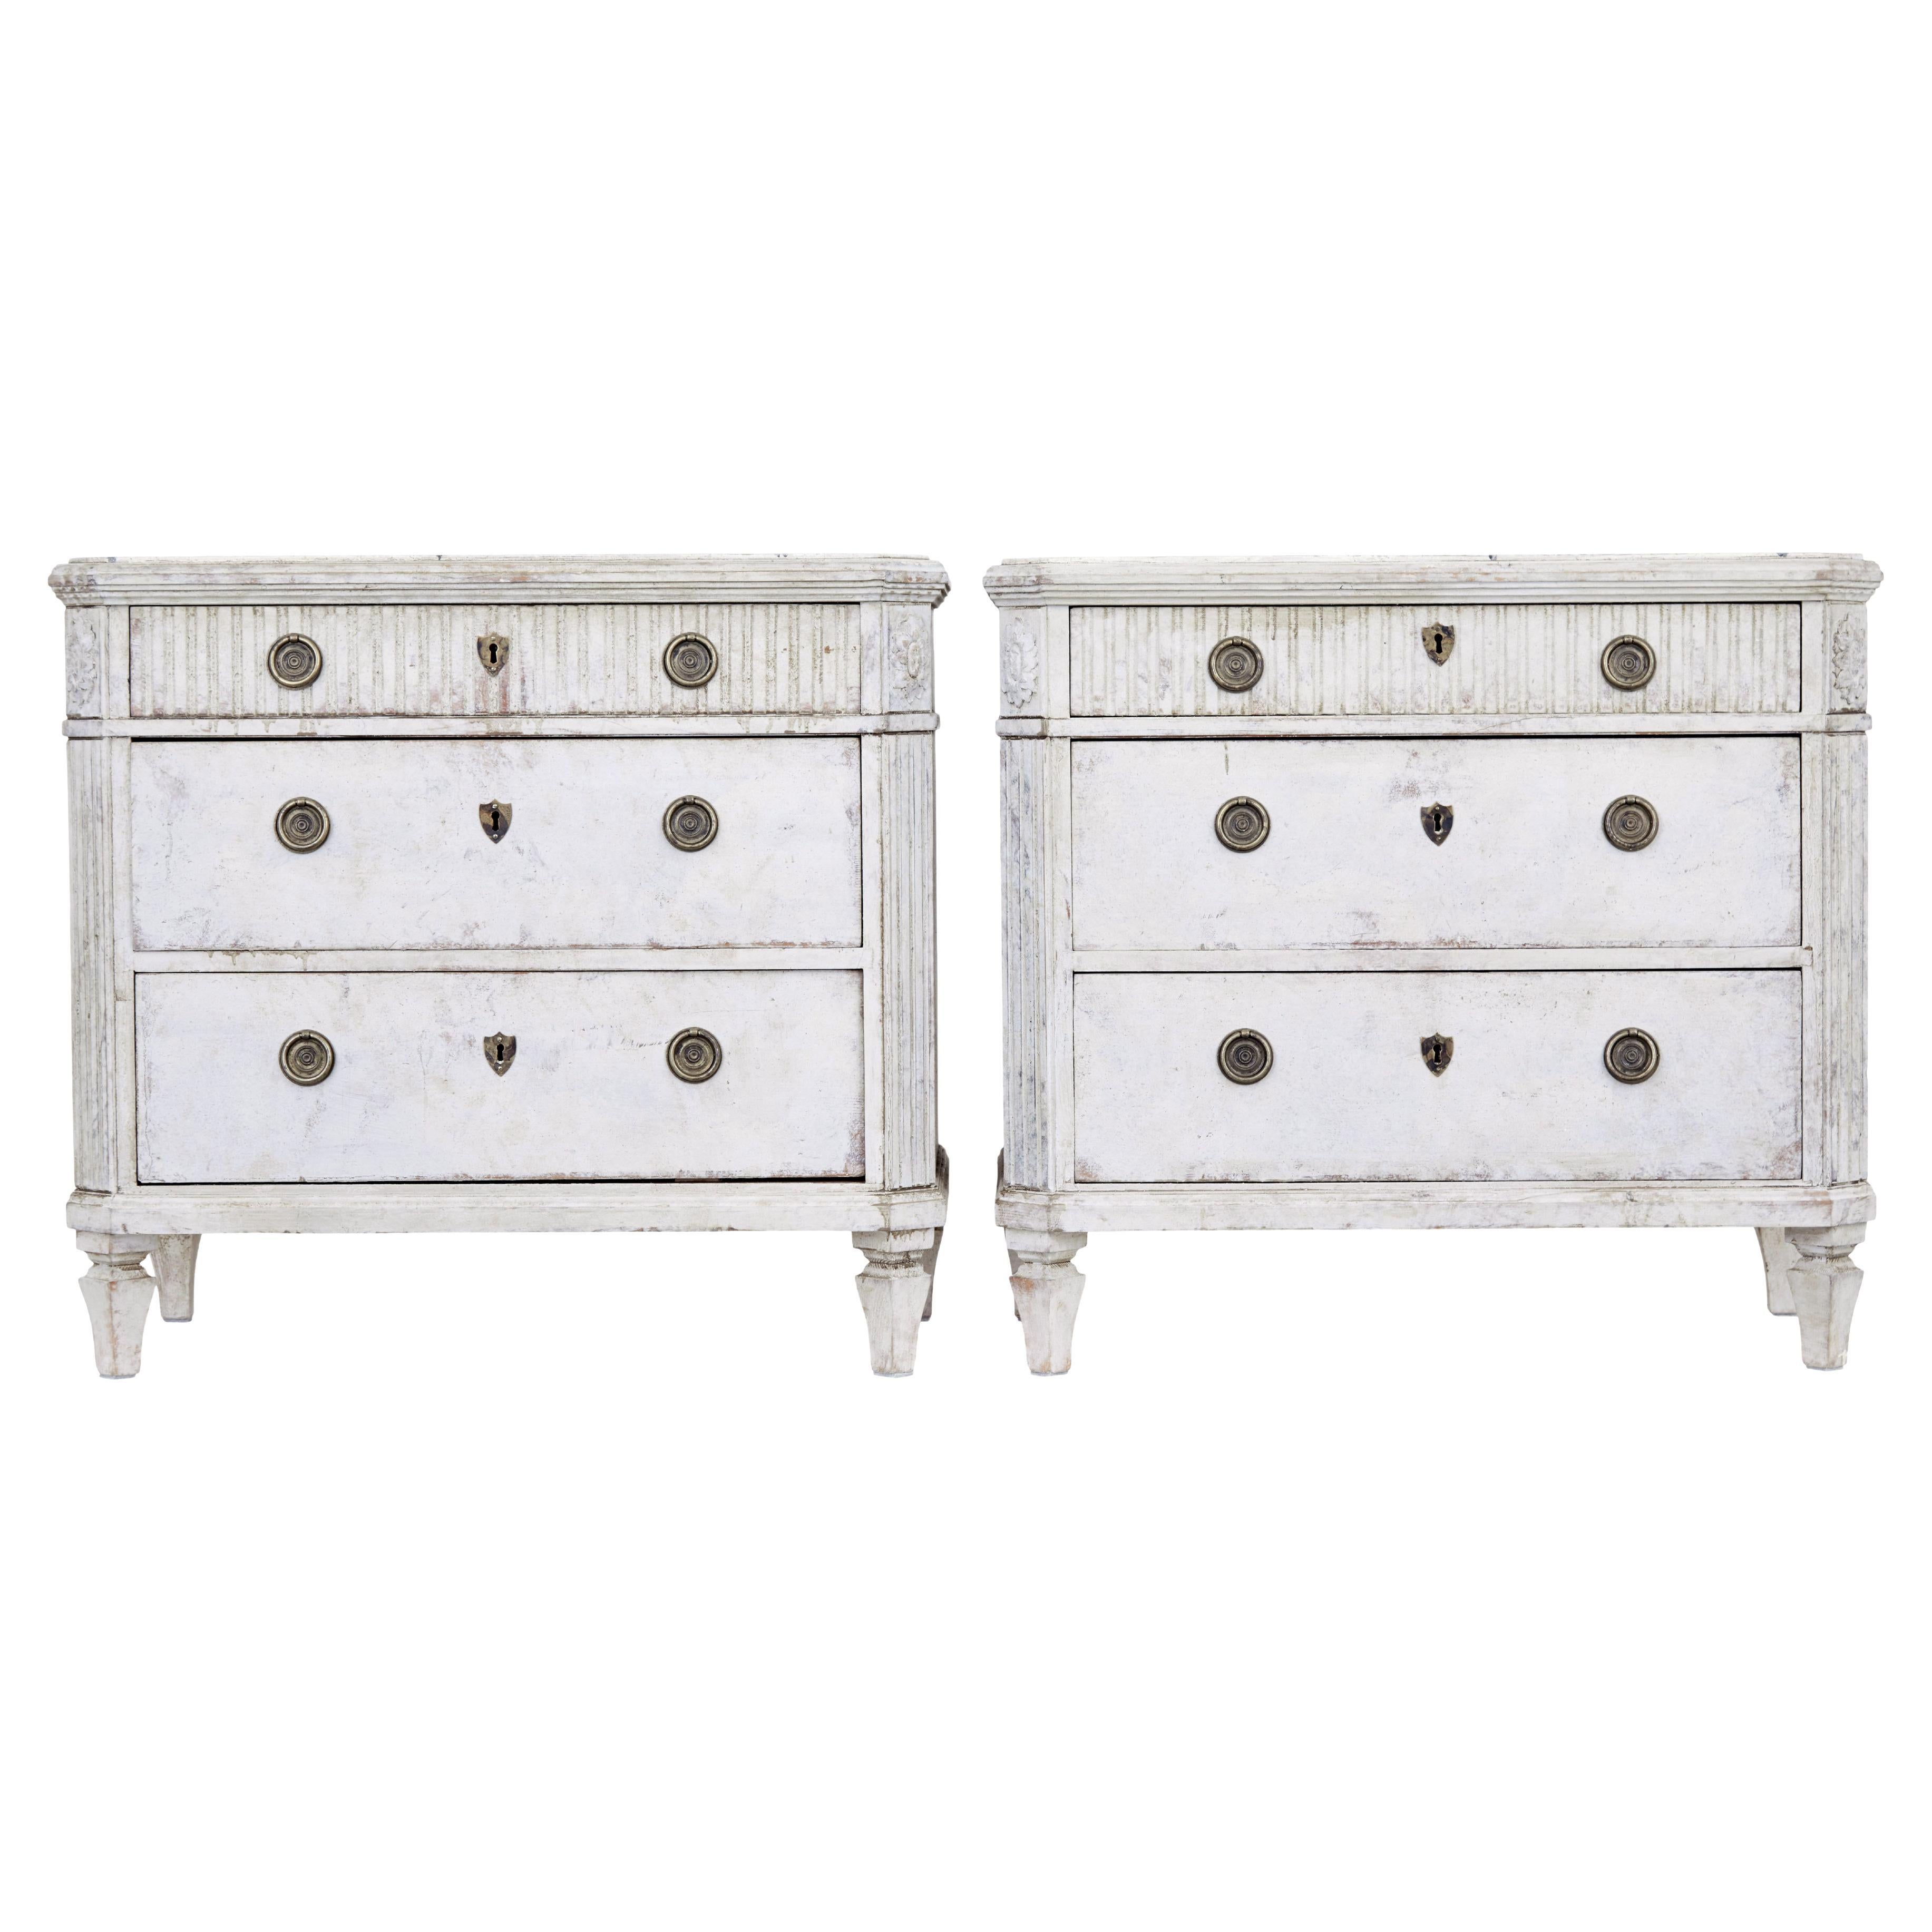 Pair of 19th century painted chest of drawers